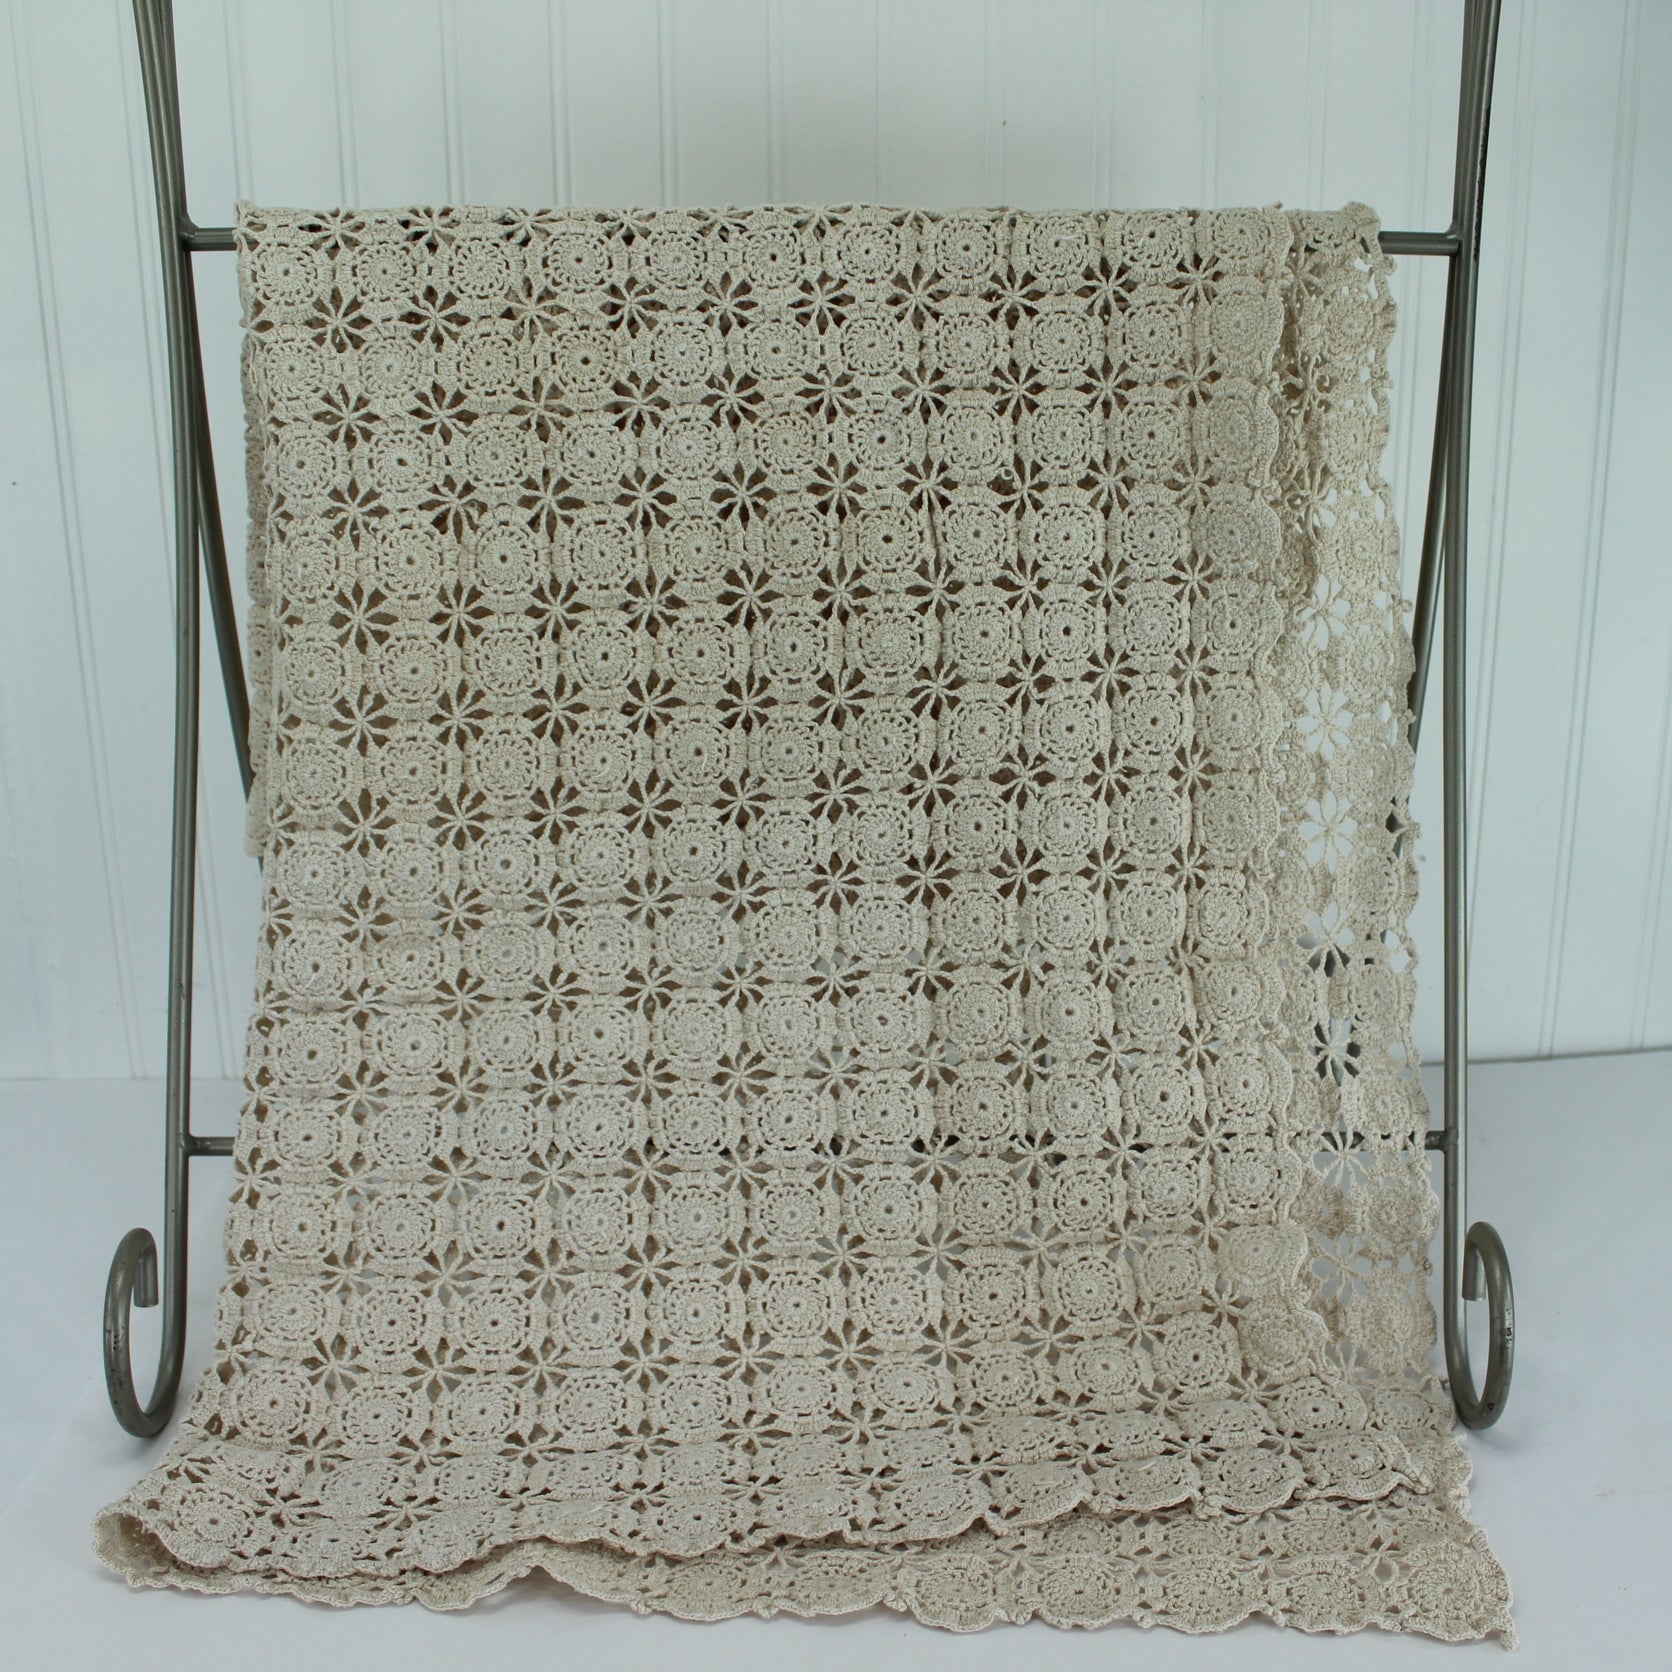  Cotton Fine Pattern Tablecloth Decor Item Heavy Well Crafted 36" Square well crafted hand made crochet